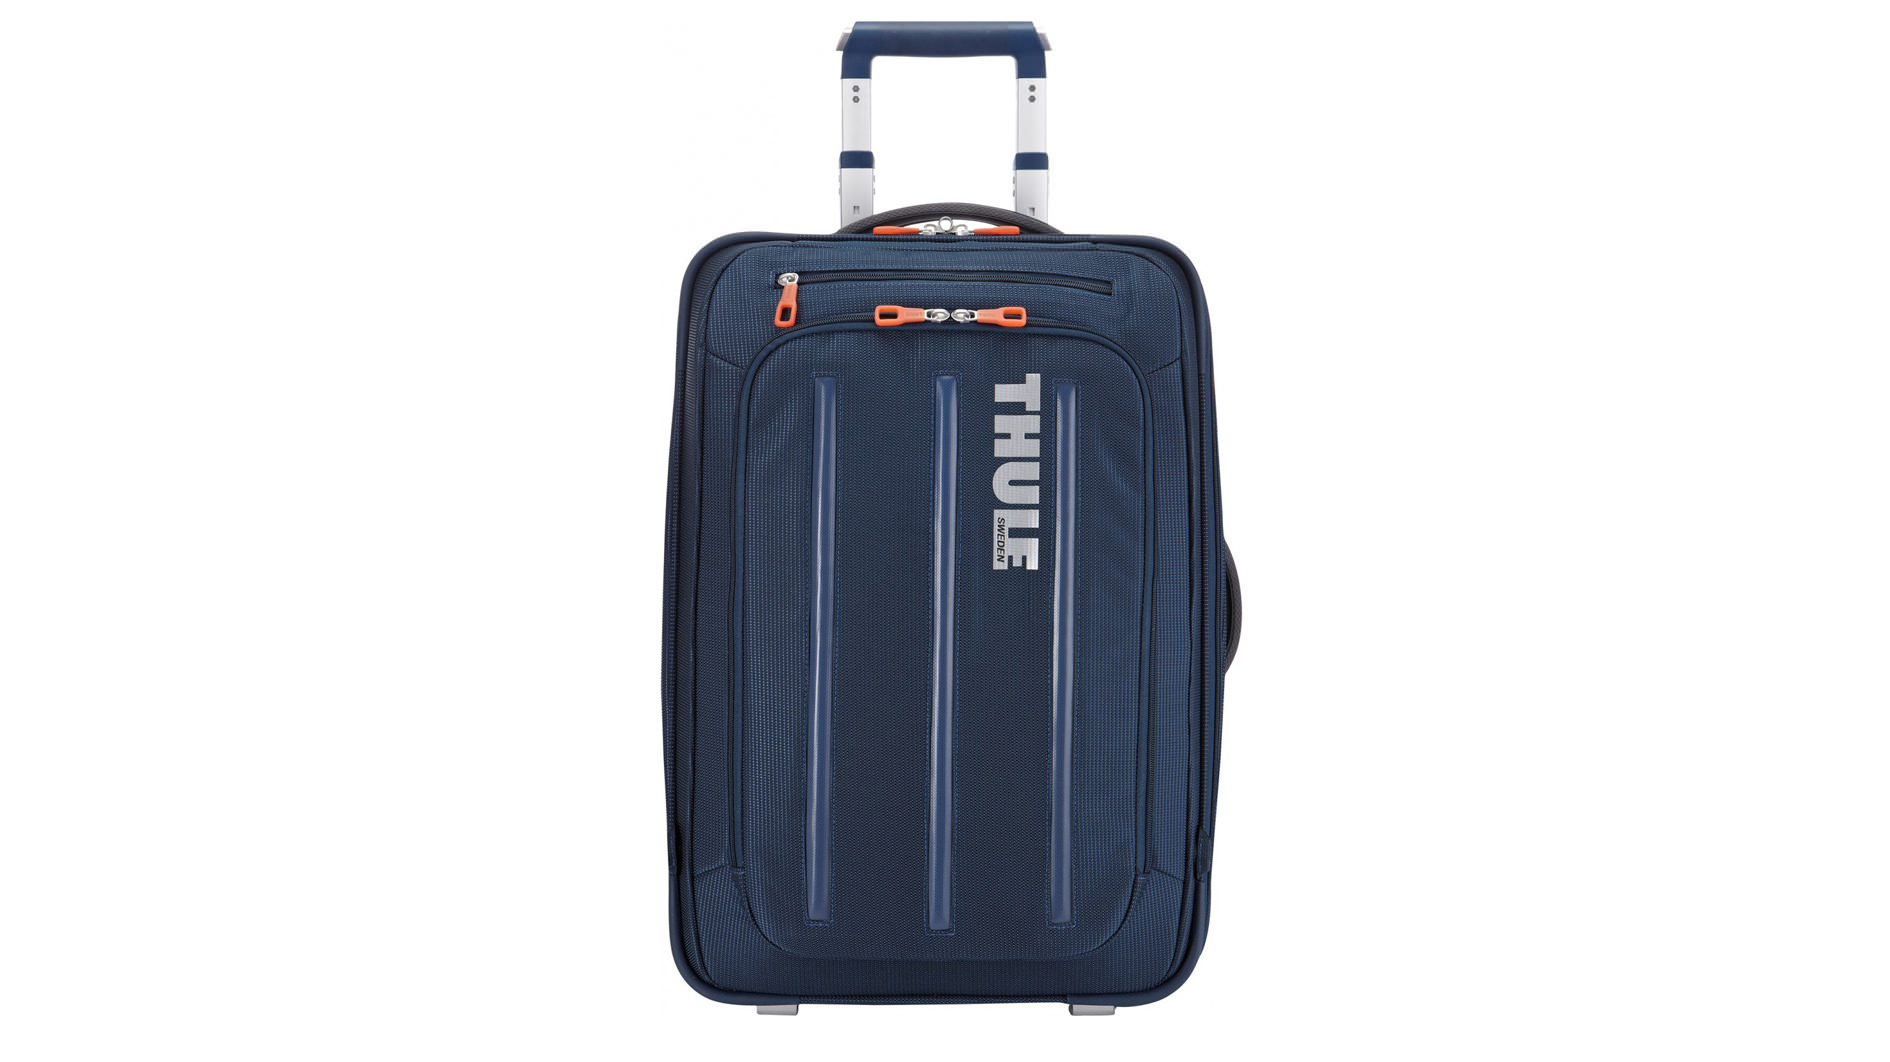 Vali-keo-THULE-Crossover-Rolling-Carry-On-38L-Xanh-dam-4-WETREK_VN